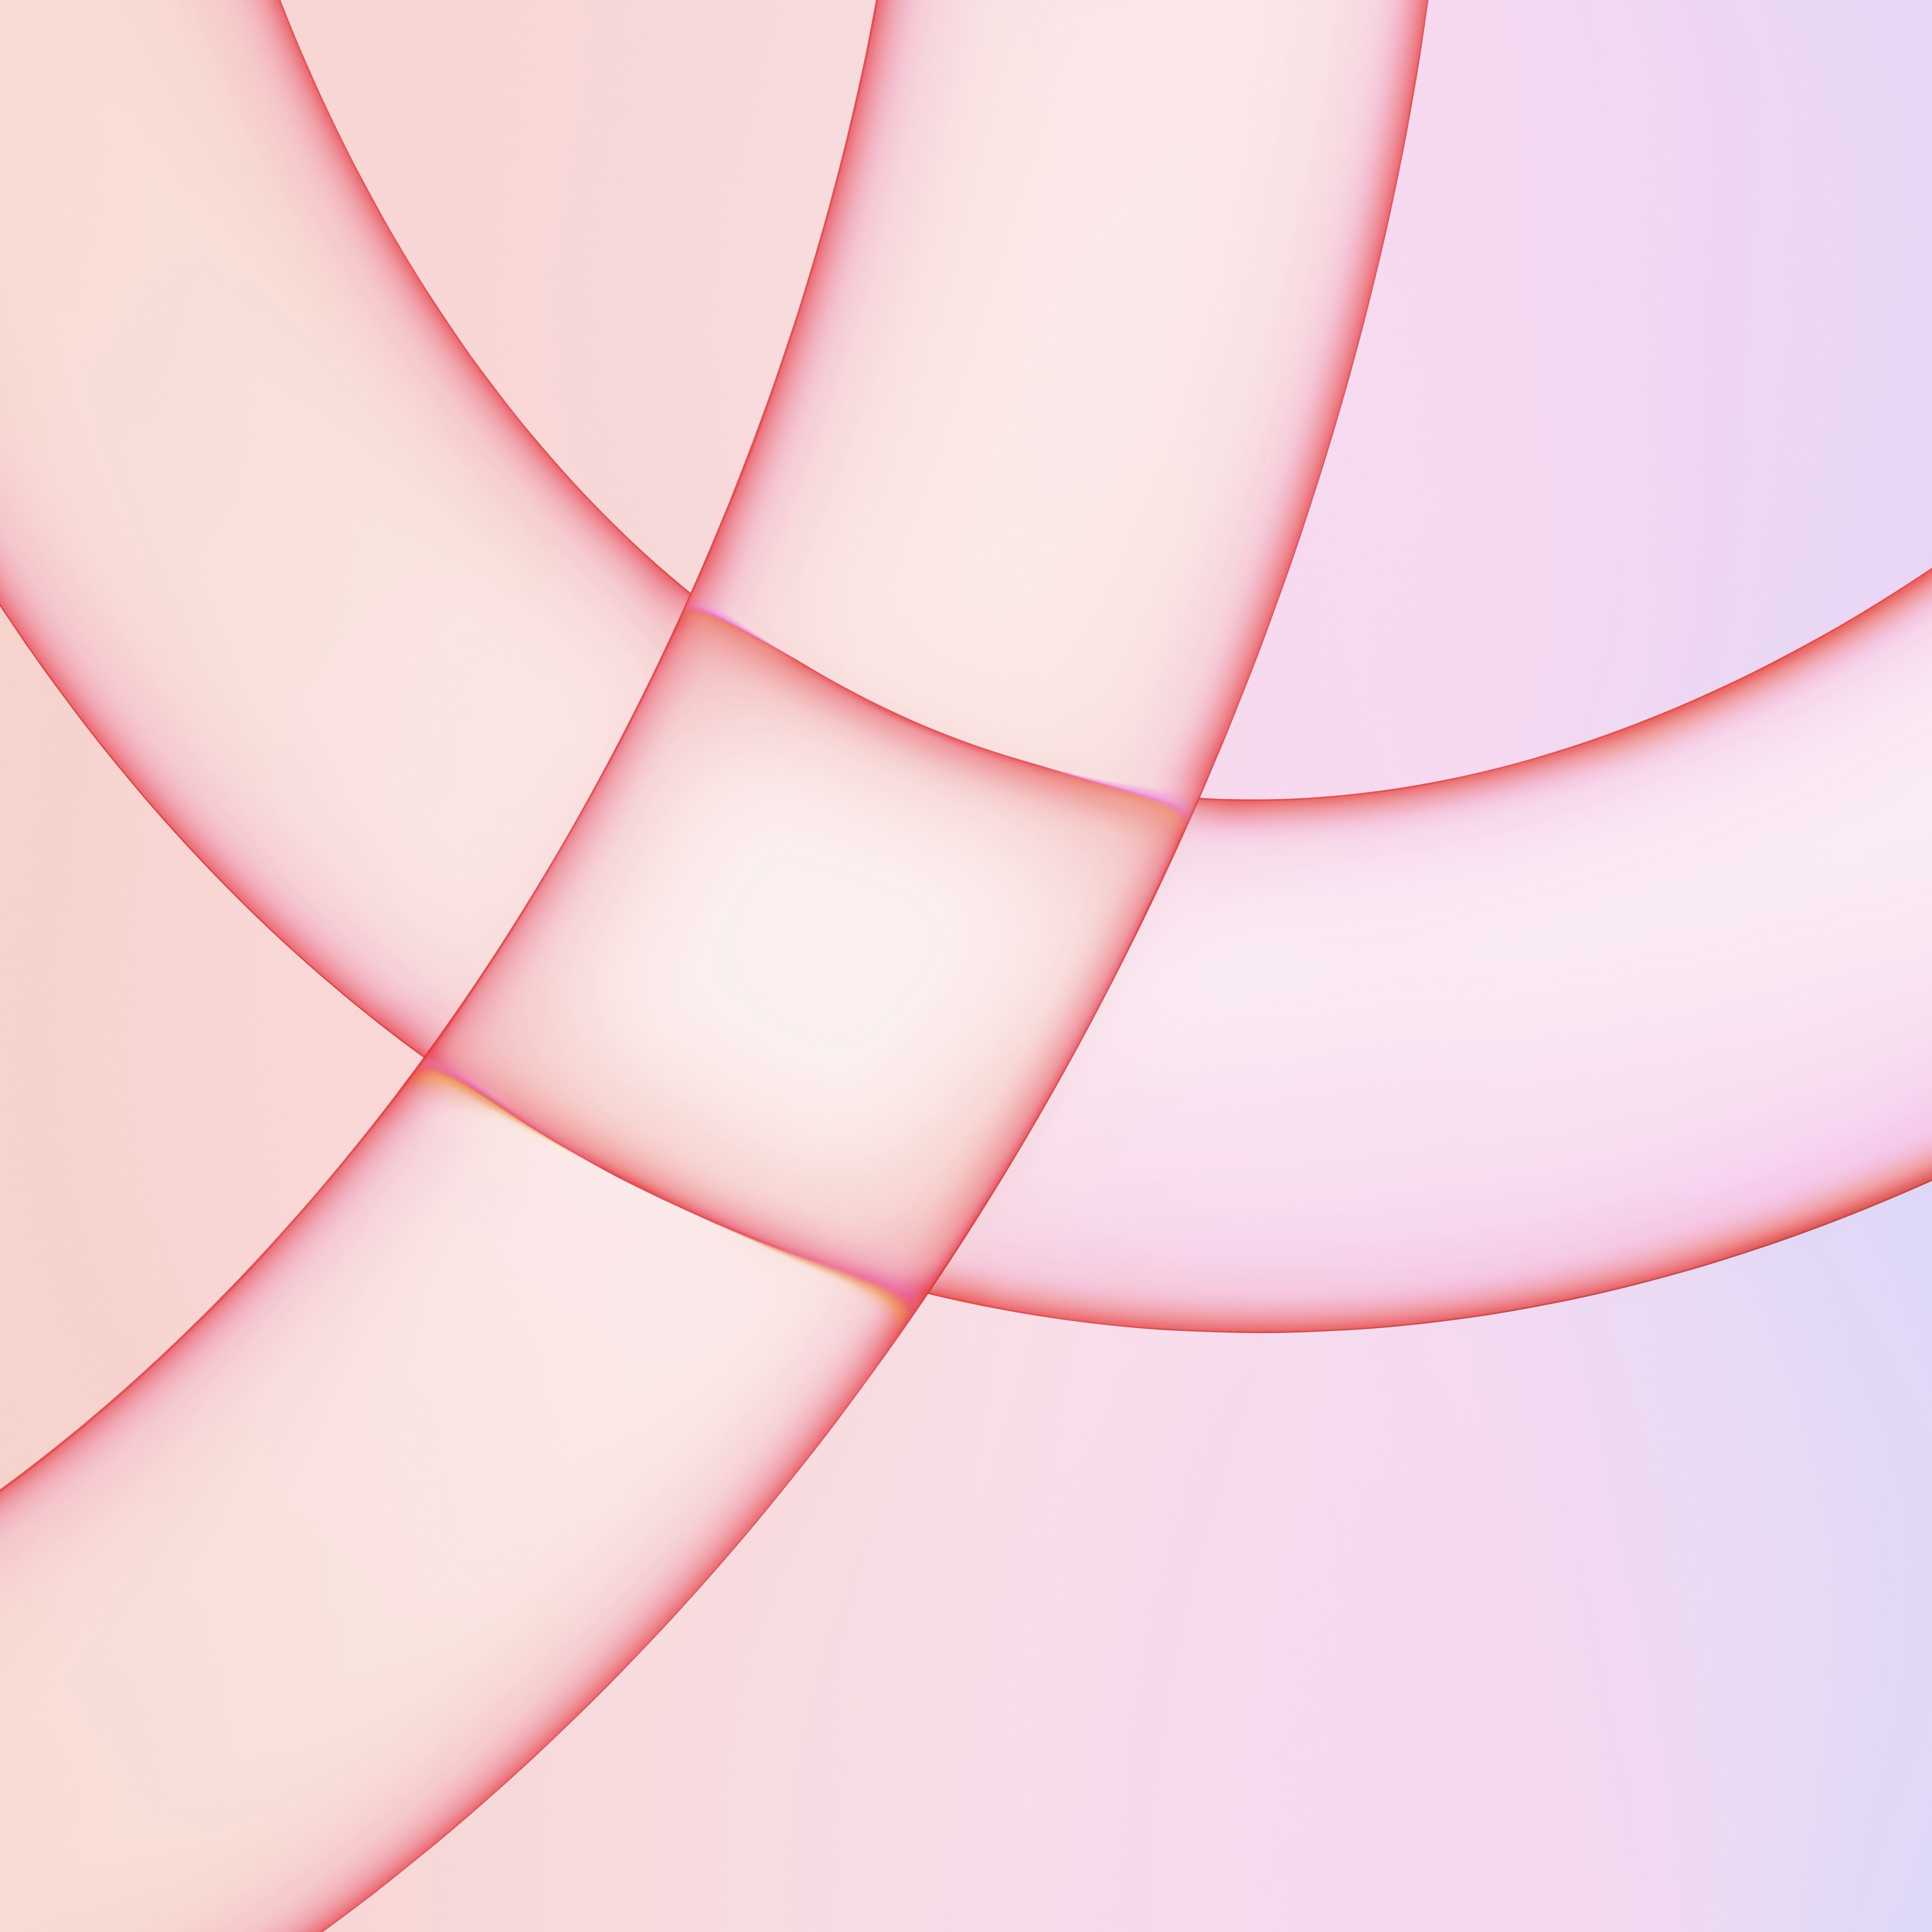 Apple Logo Pink wallpaper by theanchit  Download on ZEDGE  ccfc